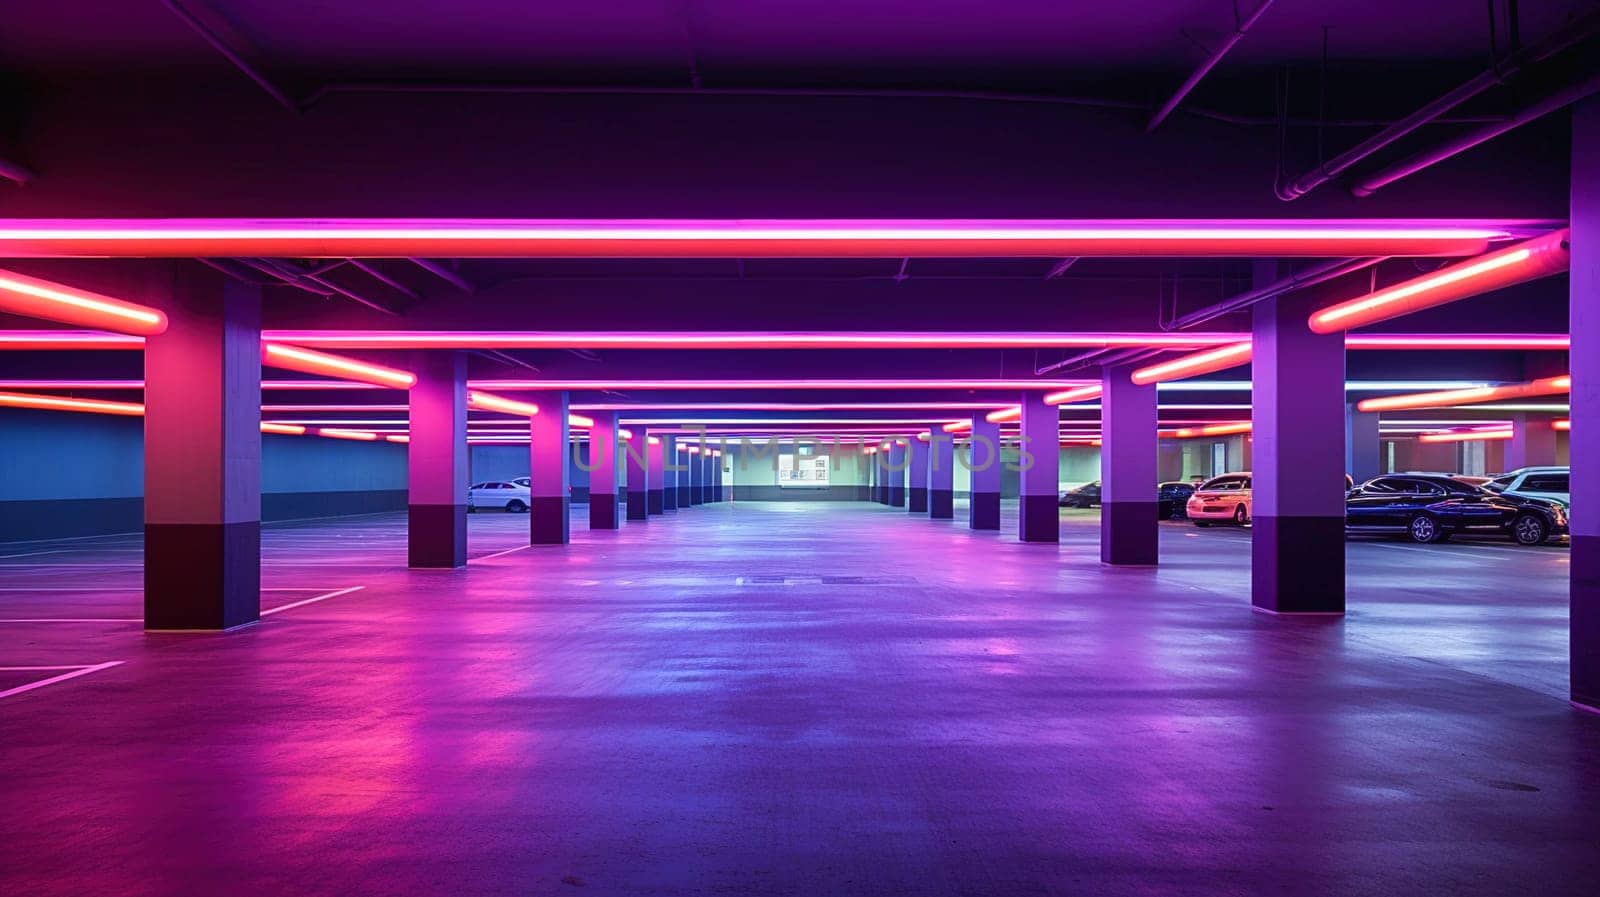 Modern fantastic underground parking in blue and purple colors. by Yurich32